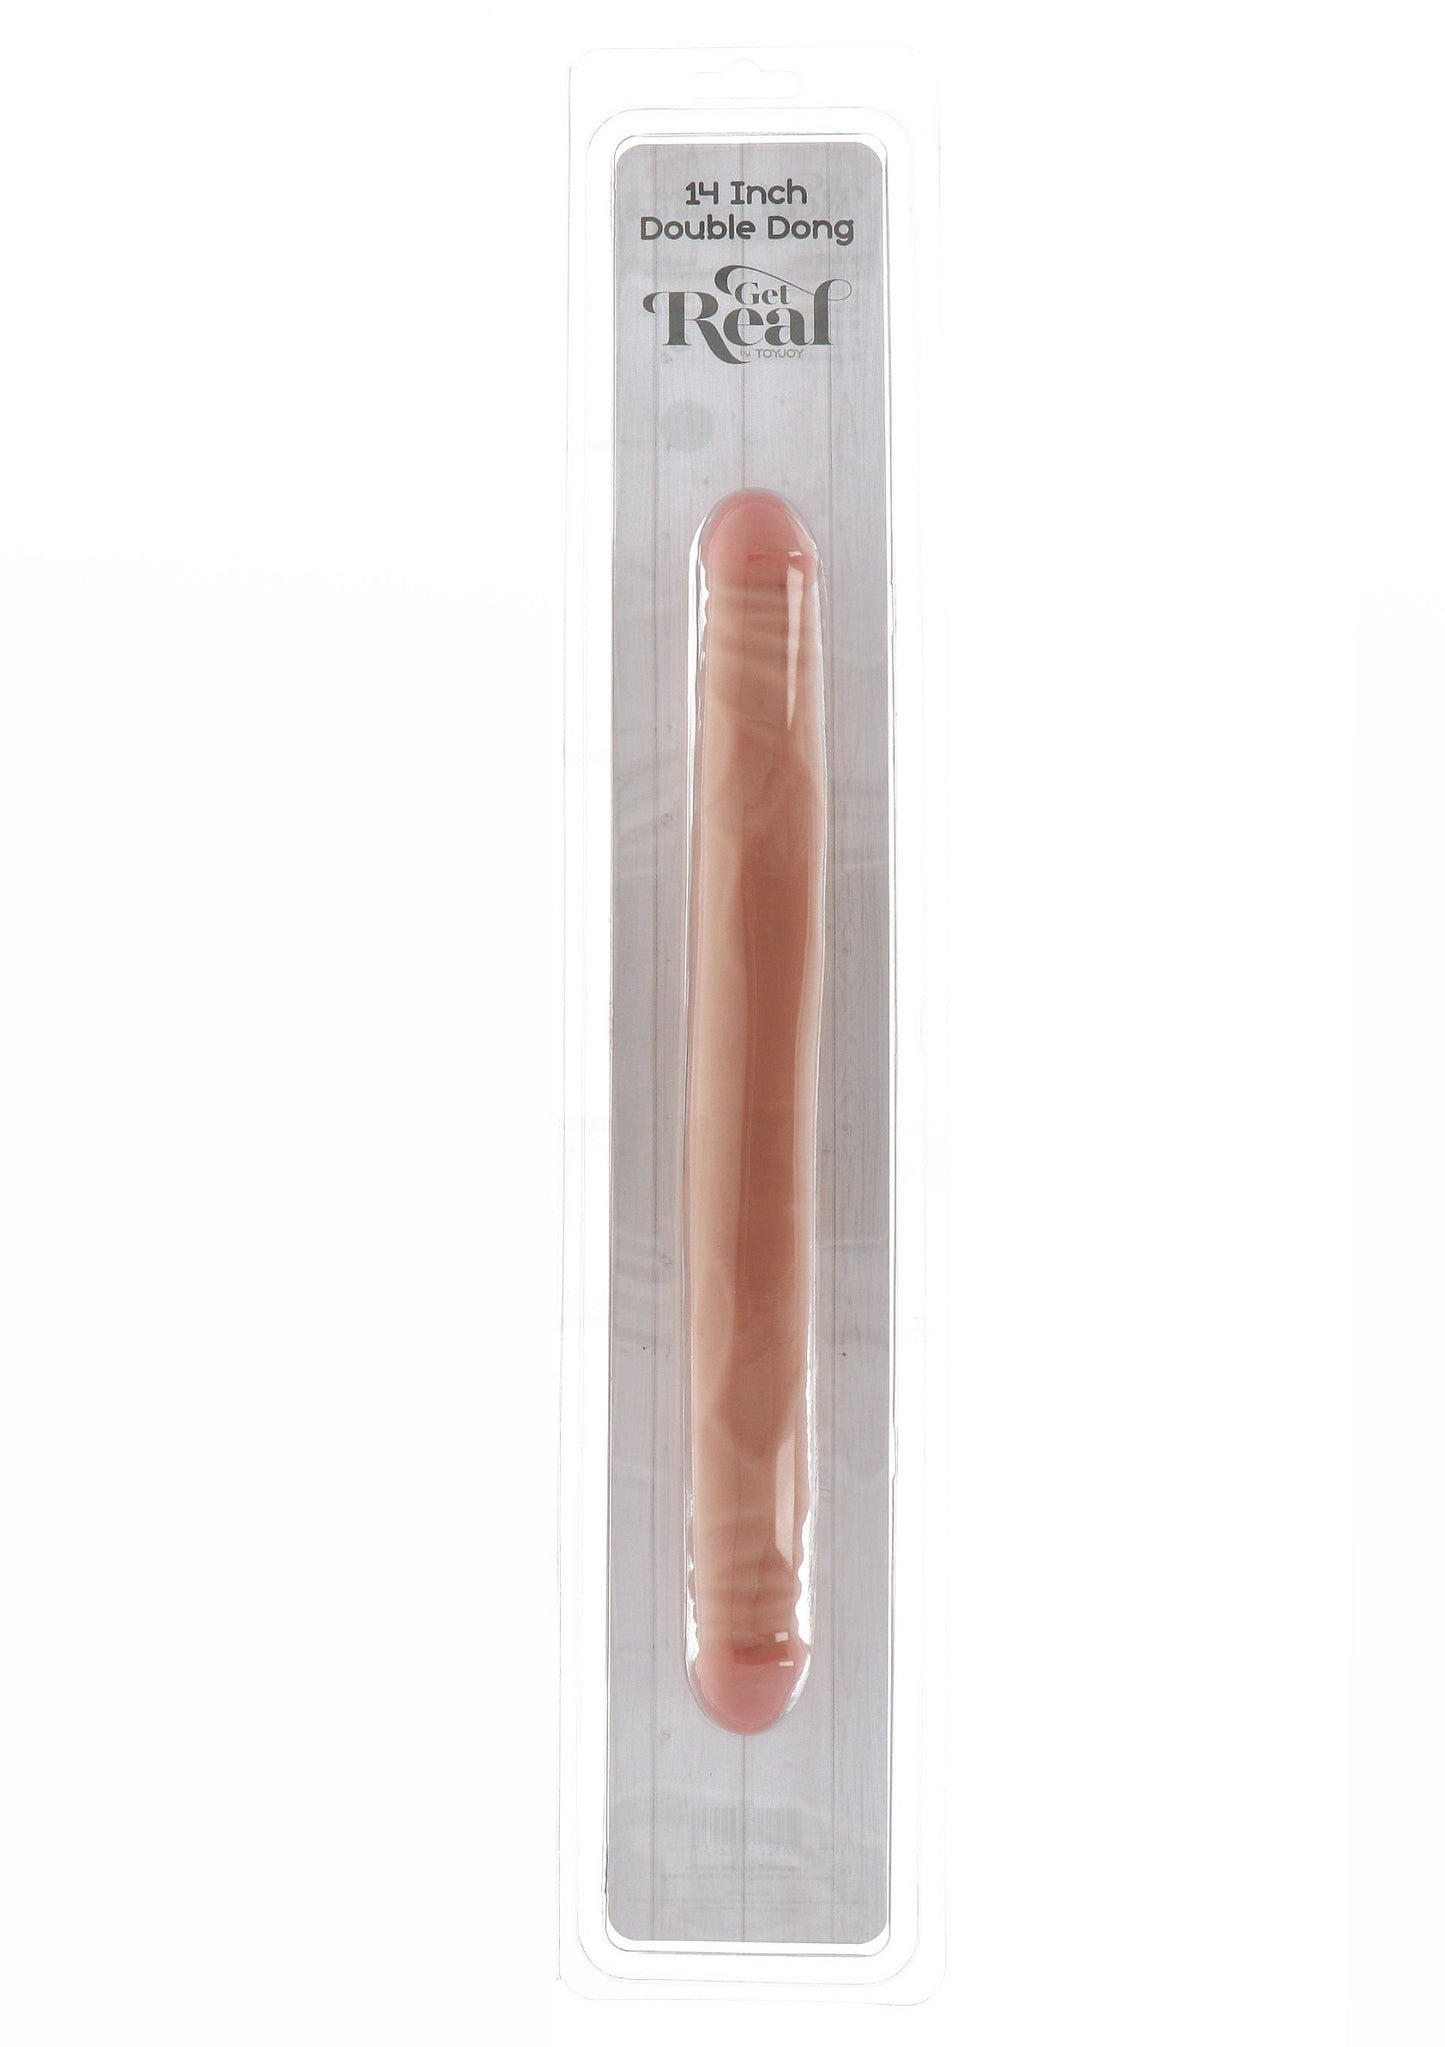 ToyJoy Get Real Double Dong 14' SKIN - 2